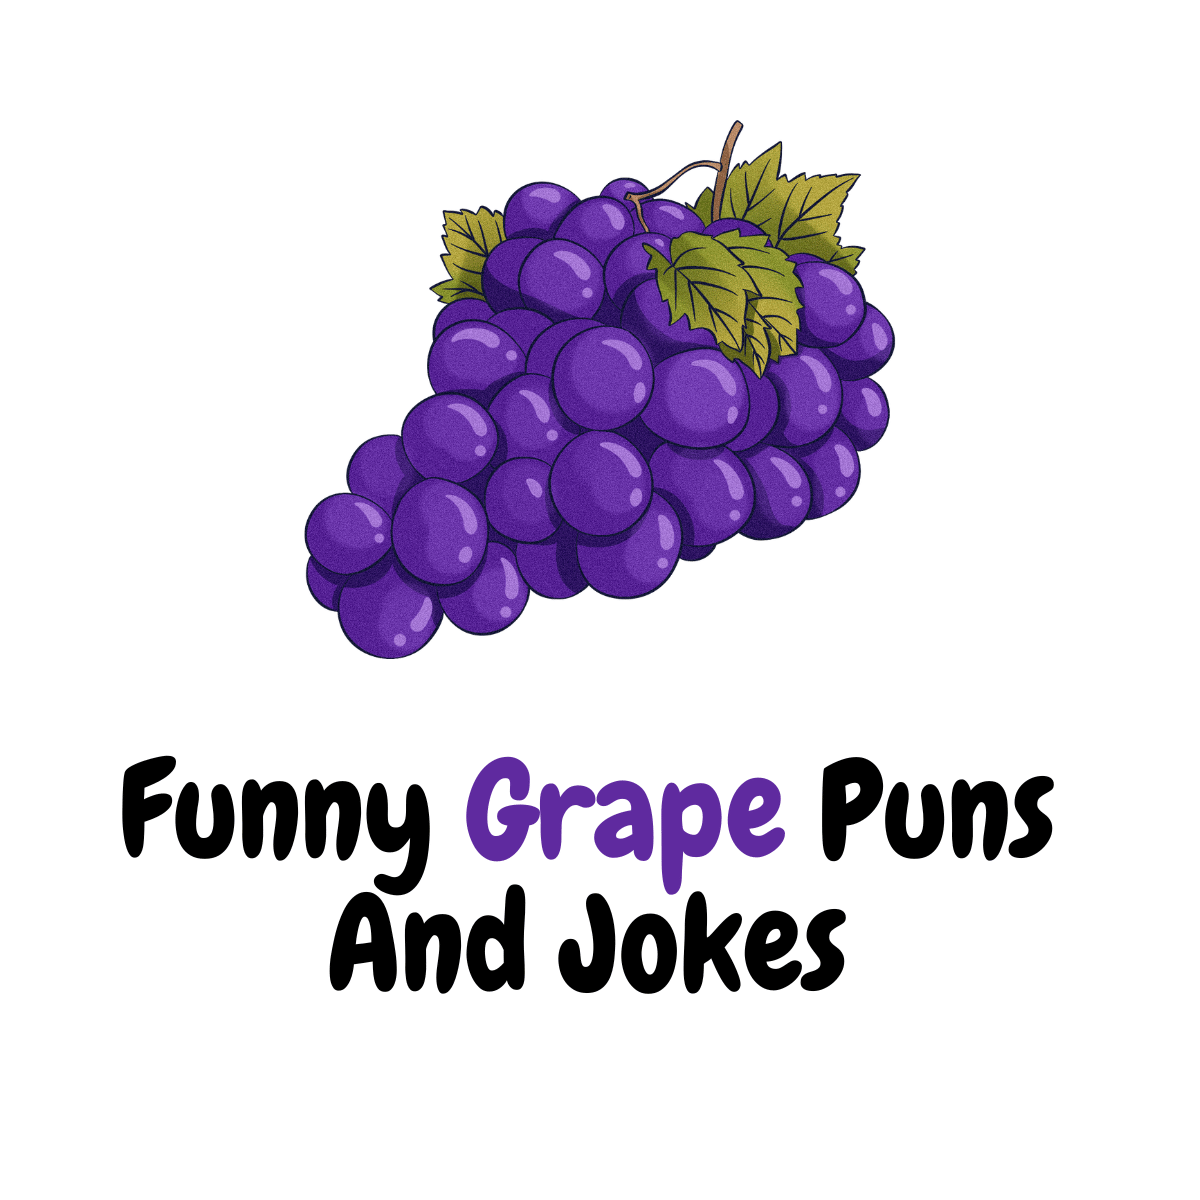 120+ Funny Grape Puns And Jokes: Juicy Humor Delights